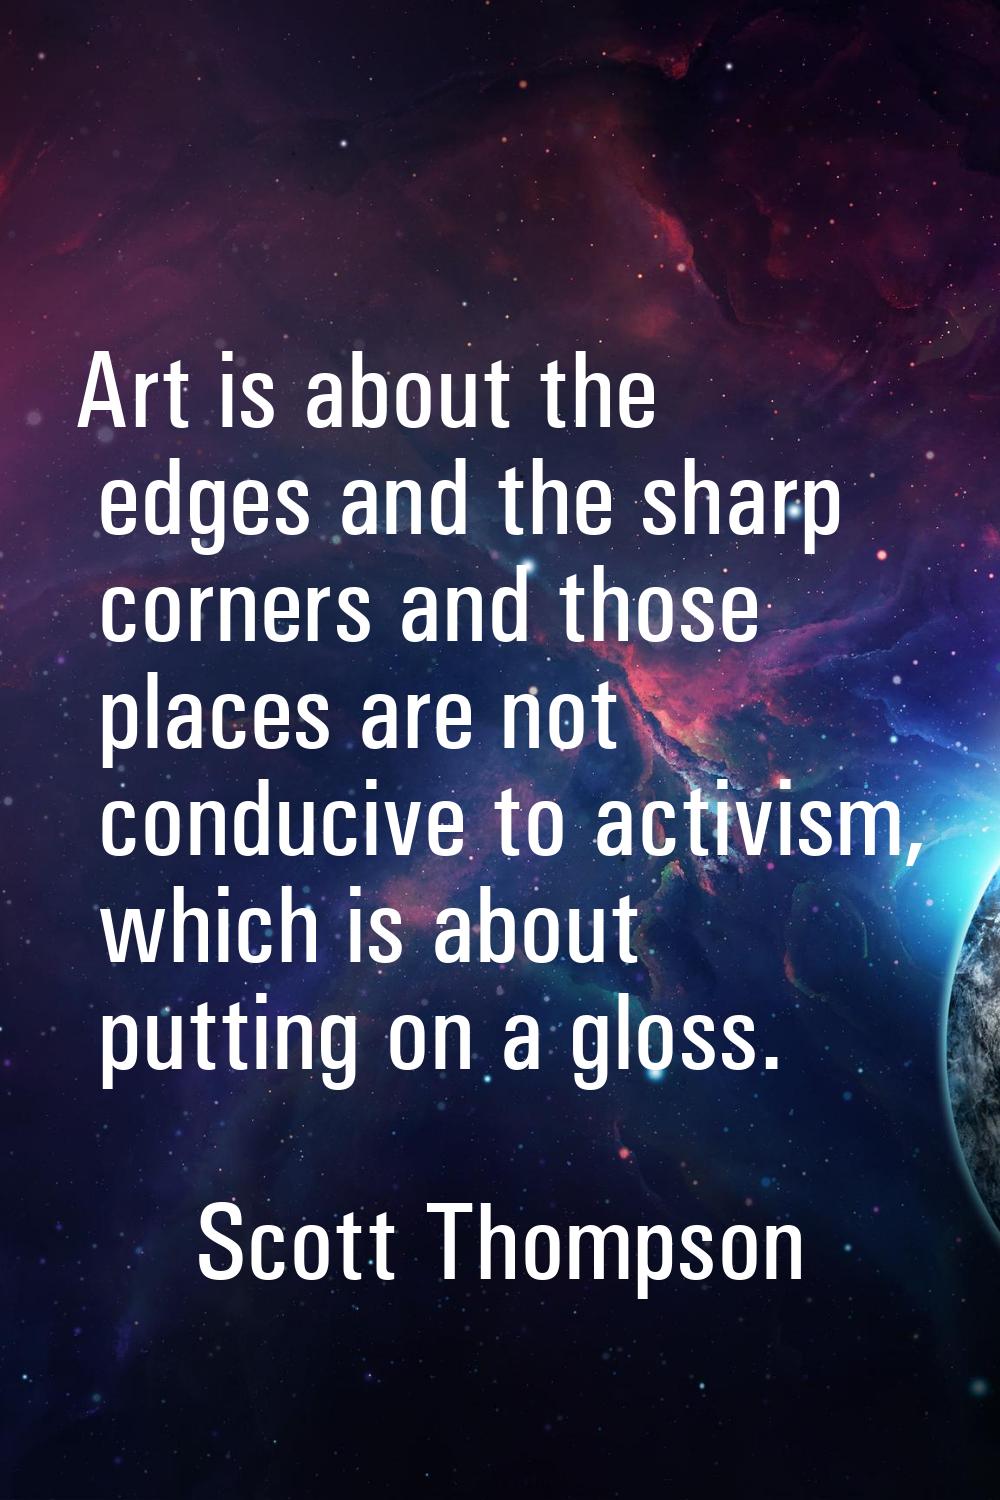 Art is about the edges and the sharp corners and those places are not conducive to activism, which 